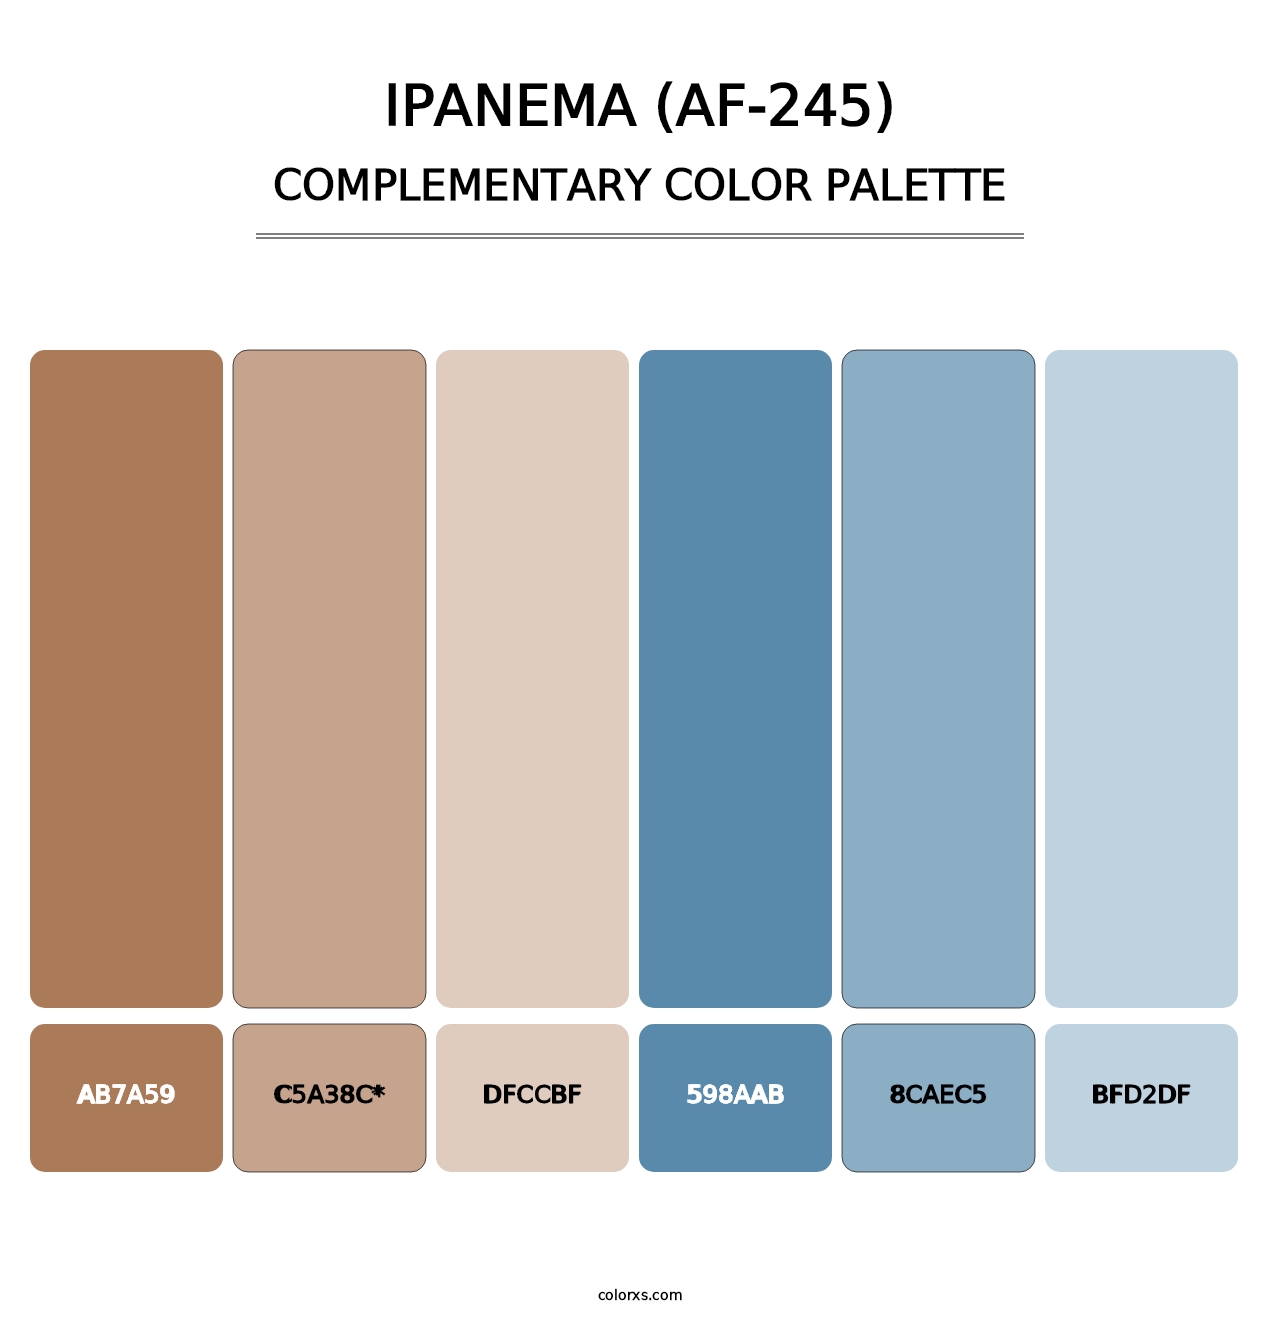 Ipanema (AF-245) - Complementary Color Palette